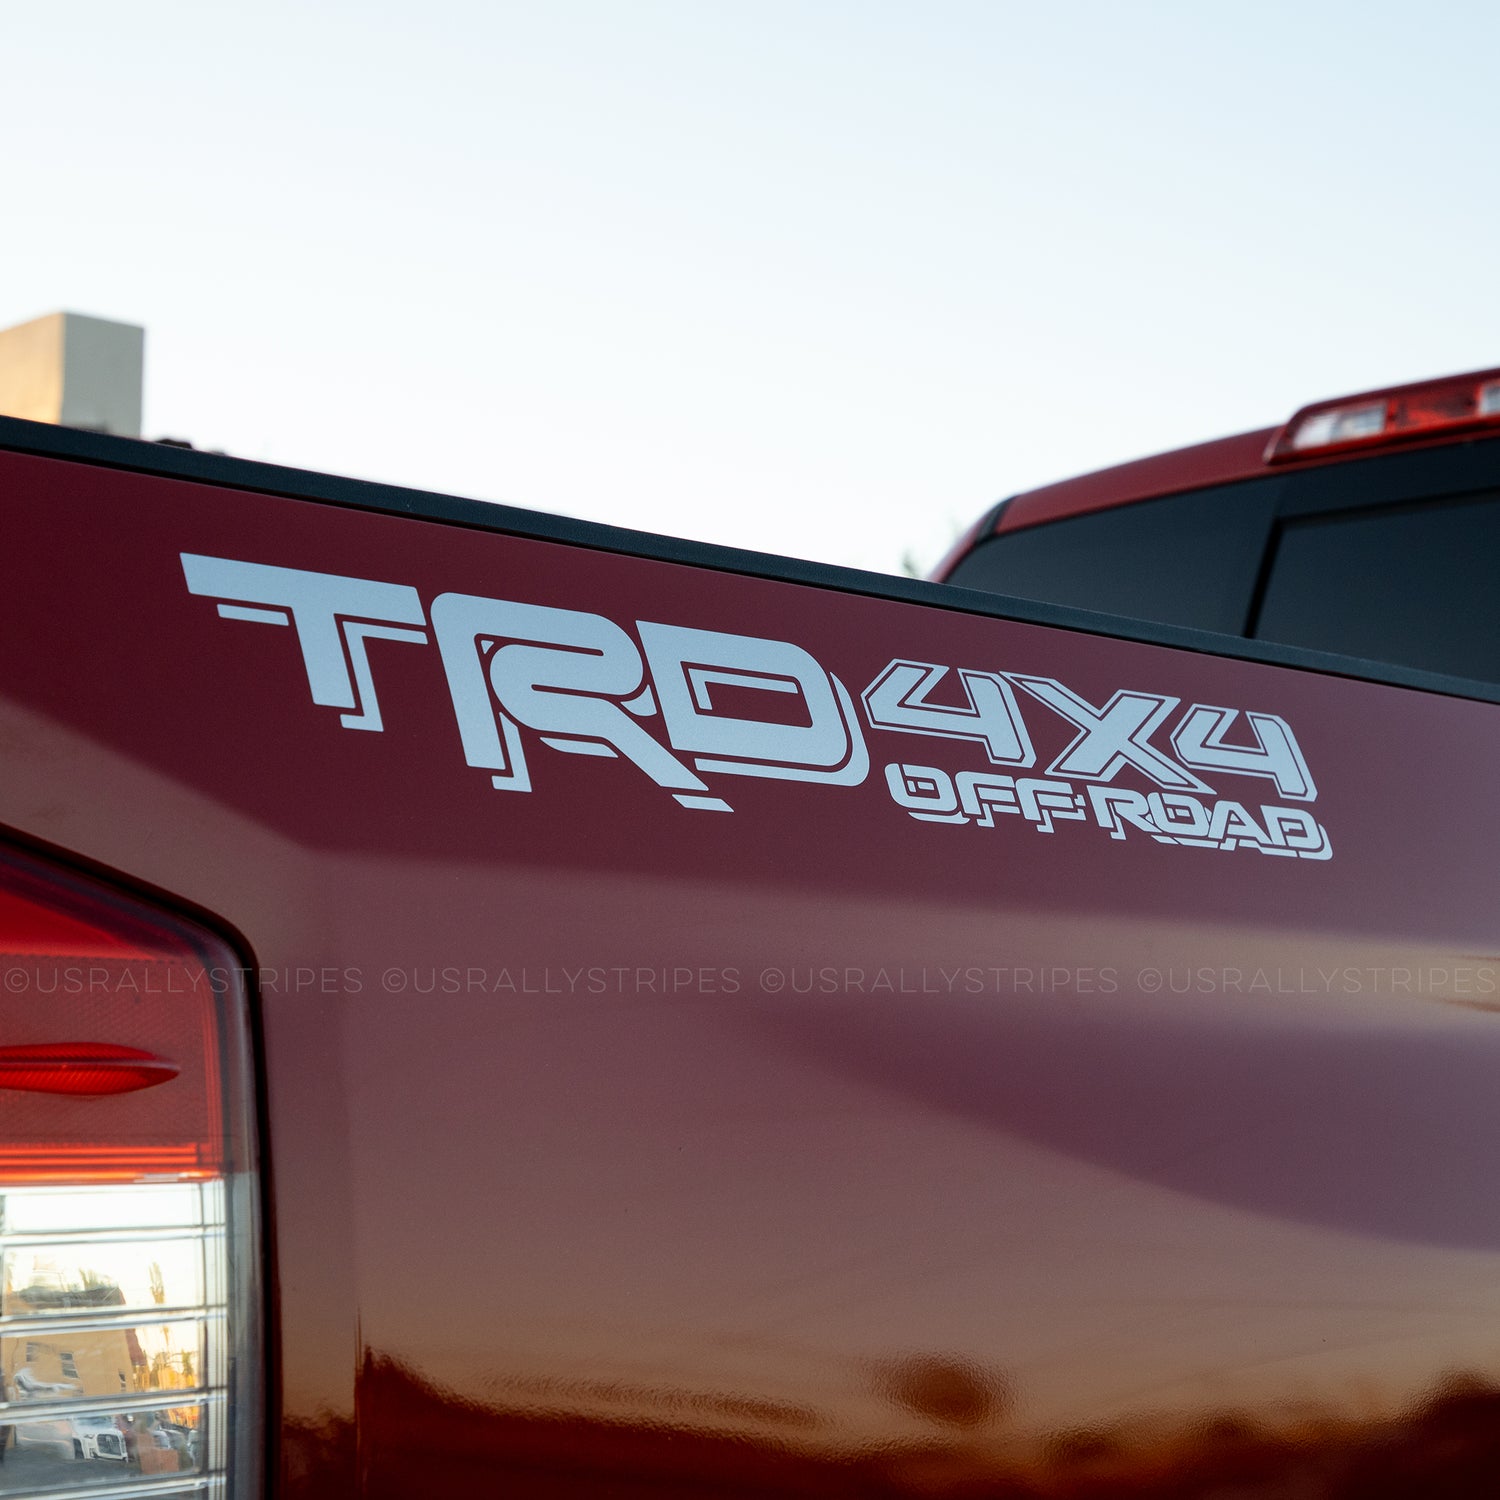 TRD 4x4 off-road decal on Toyota Tundra - side view